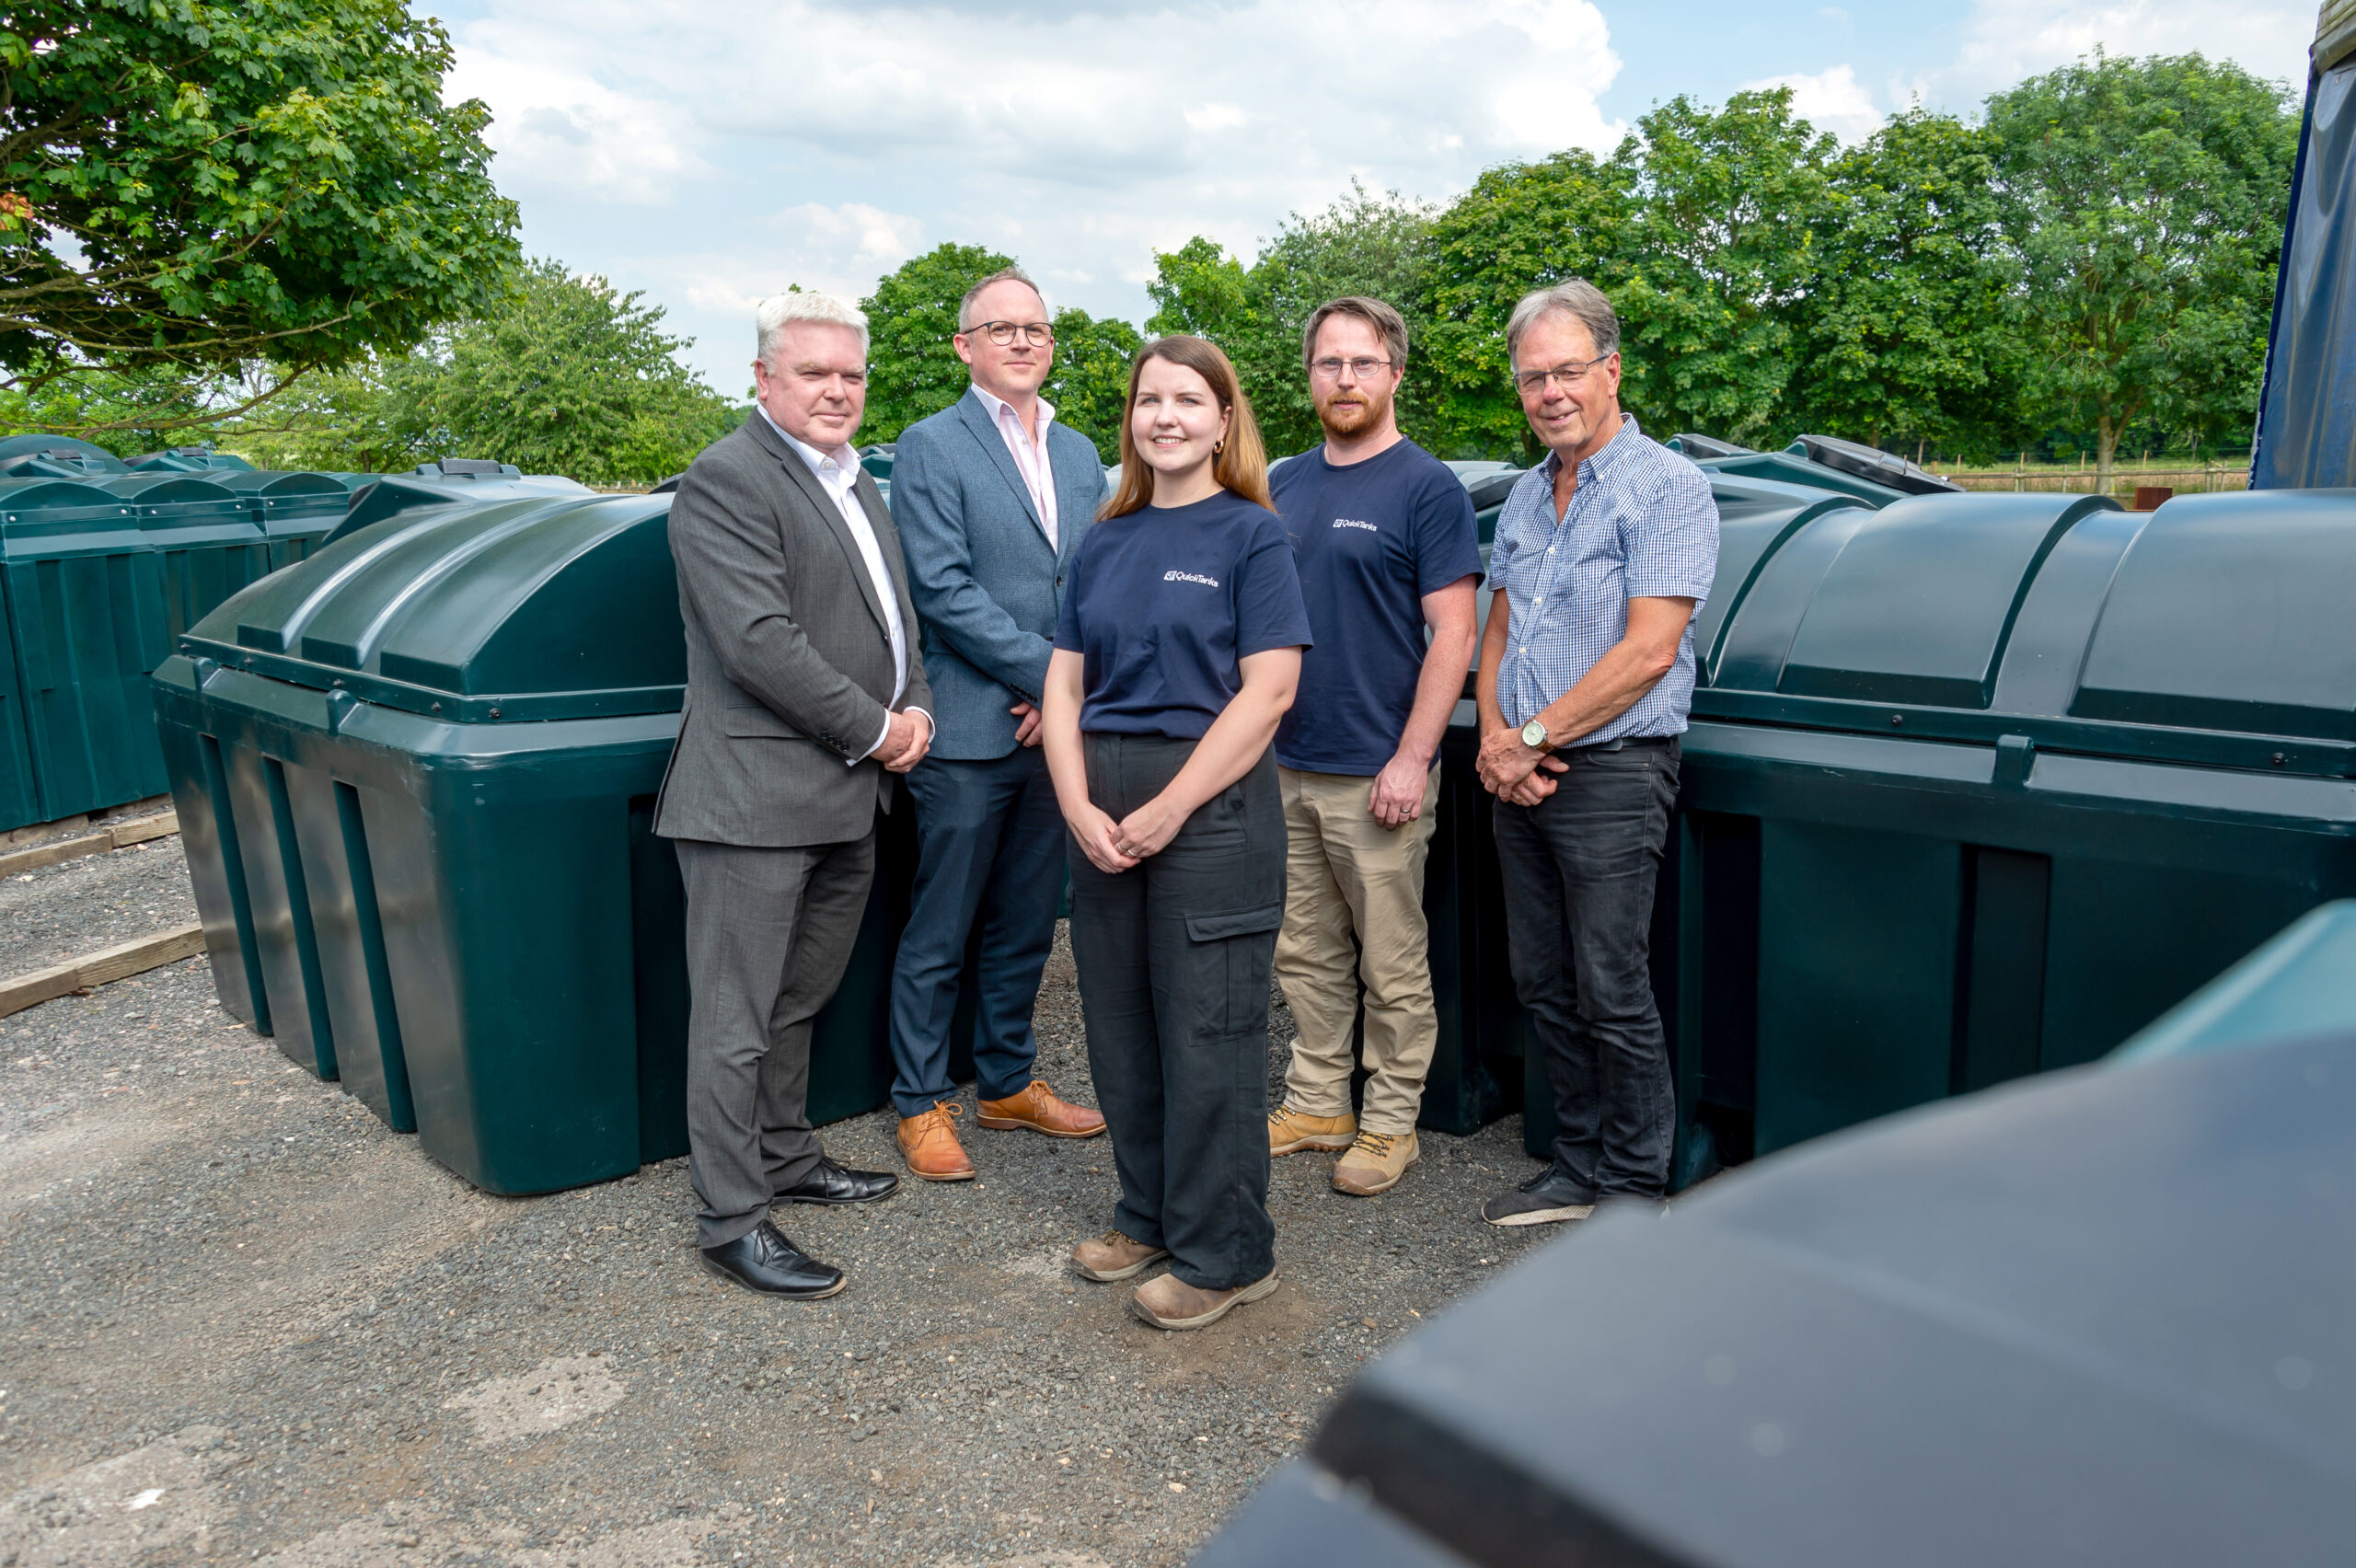 Heating oil tank supplier boosts turnover by over £450,000 in 12 months